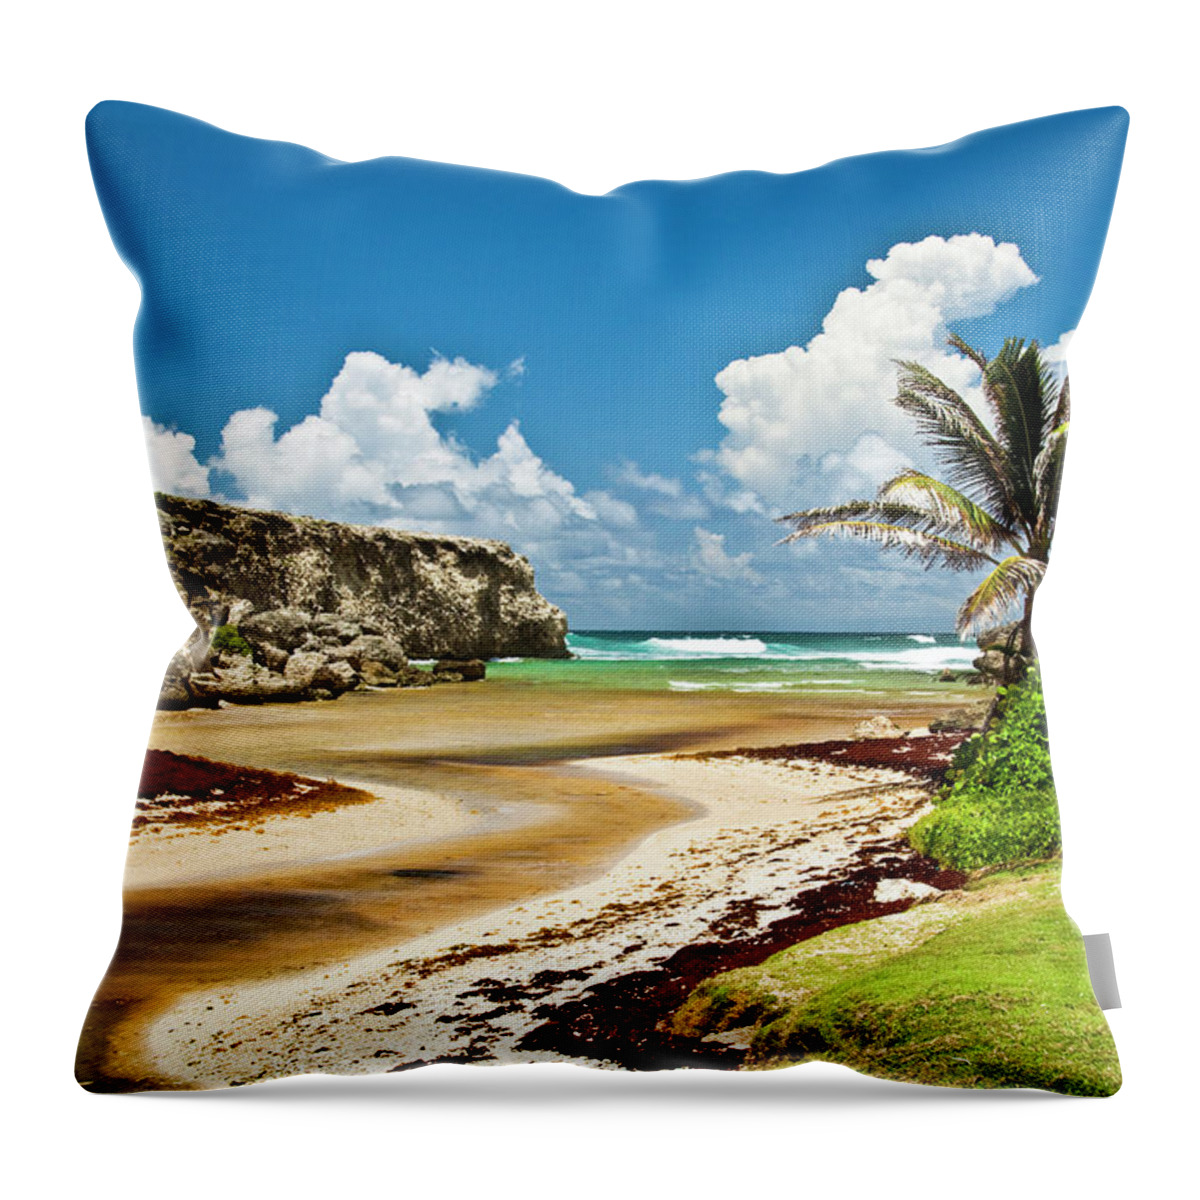 Scenics Throw Pillow featuring the photograph Barbados Coastline by Christopher Kimmel